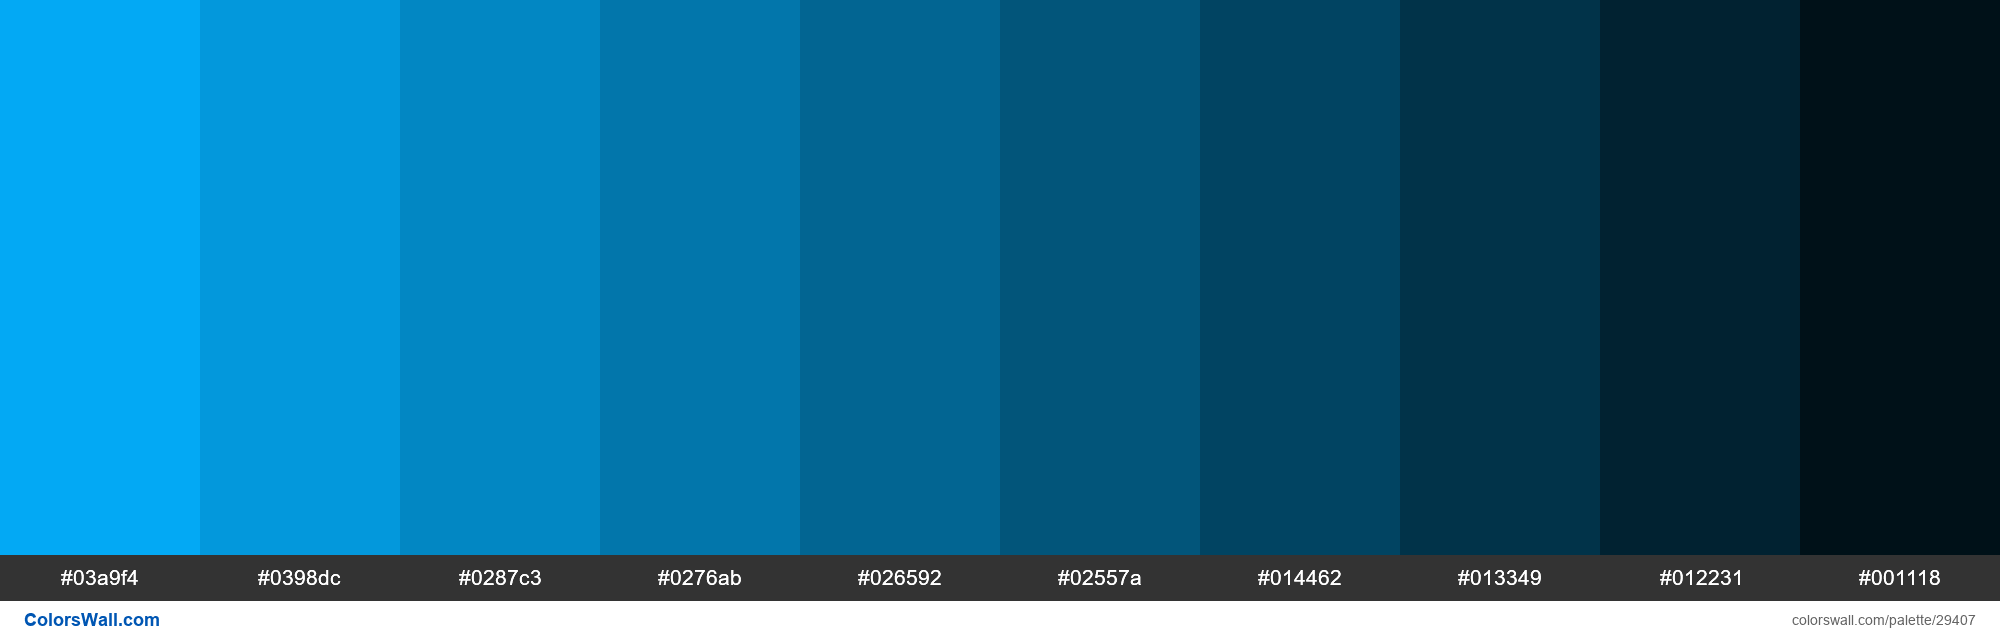 https://colorswall.com/images/palettes/shades-of-material-design-light-blue-color-03a9f4-hex-29407-colorswall.png